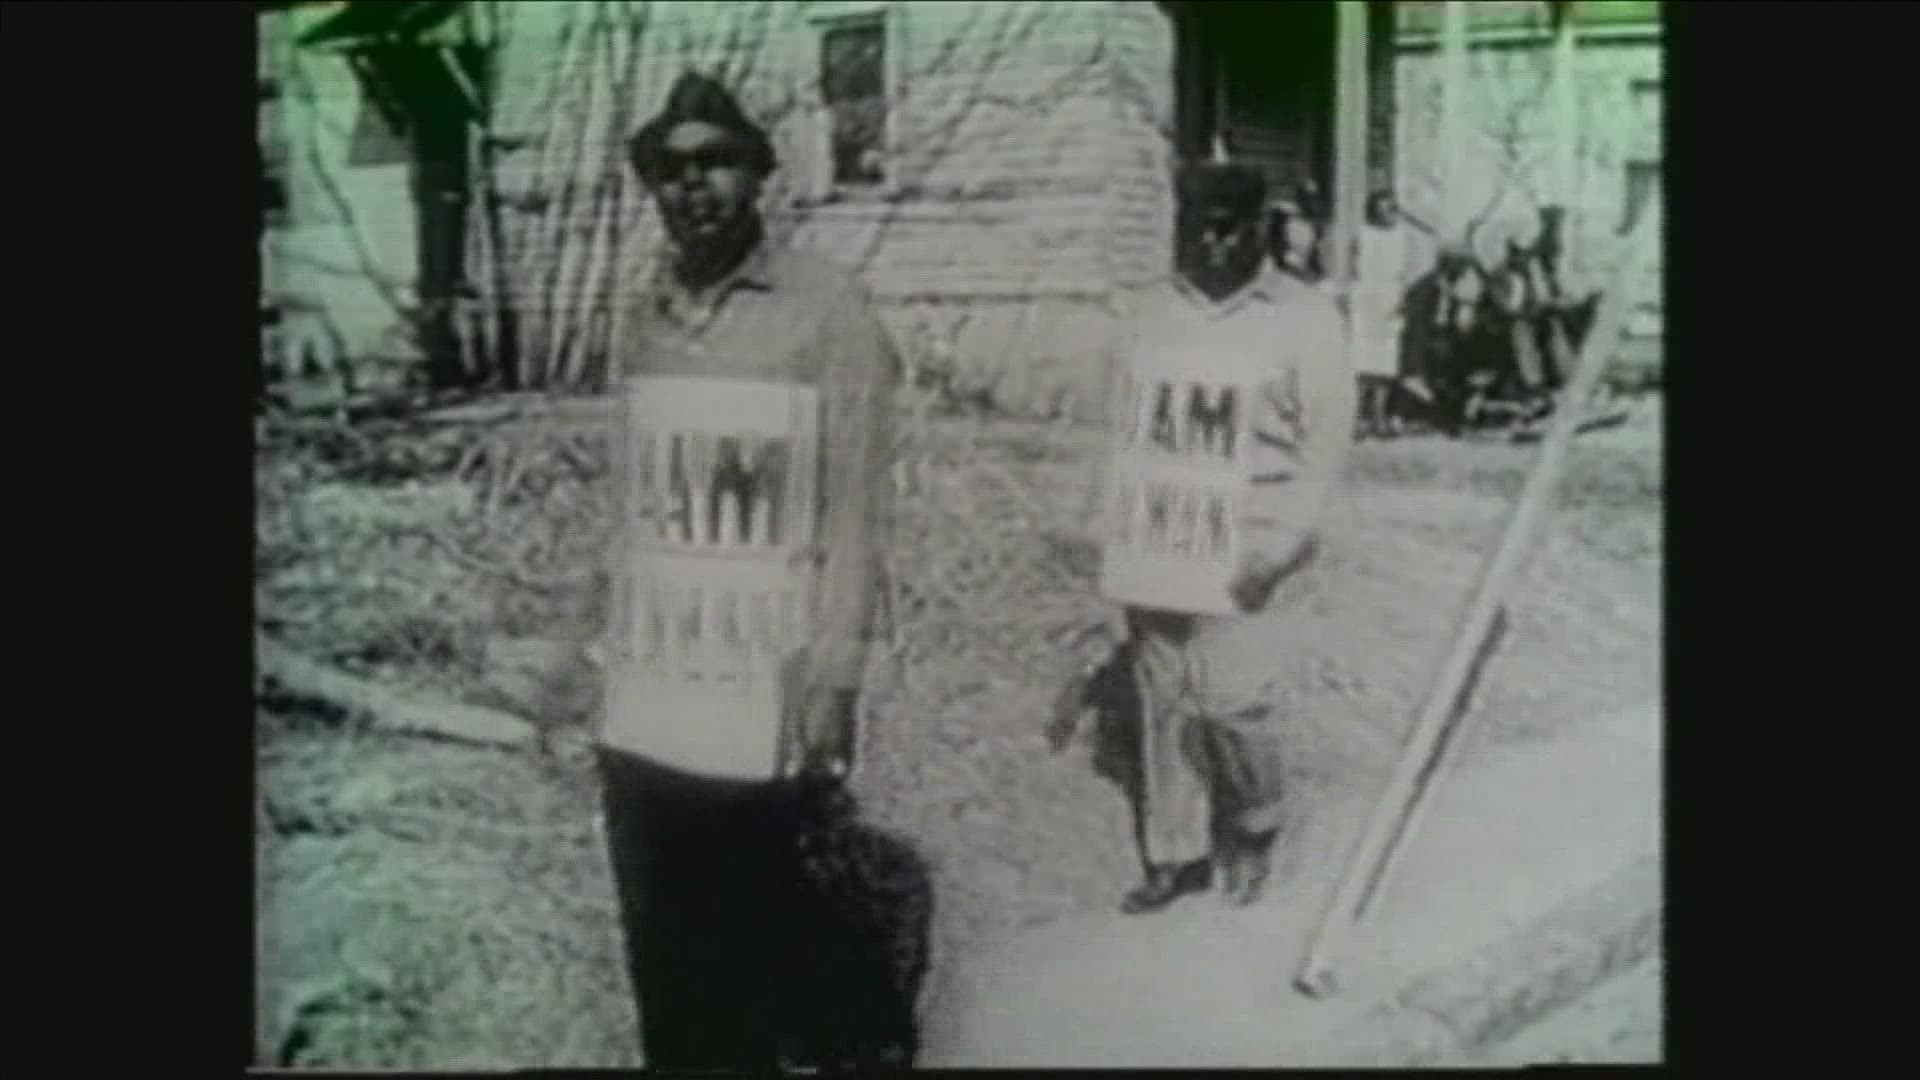 Calhoun was a teen in 1968 when he helped create the now-iconic "I Am A Man" signs.